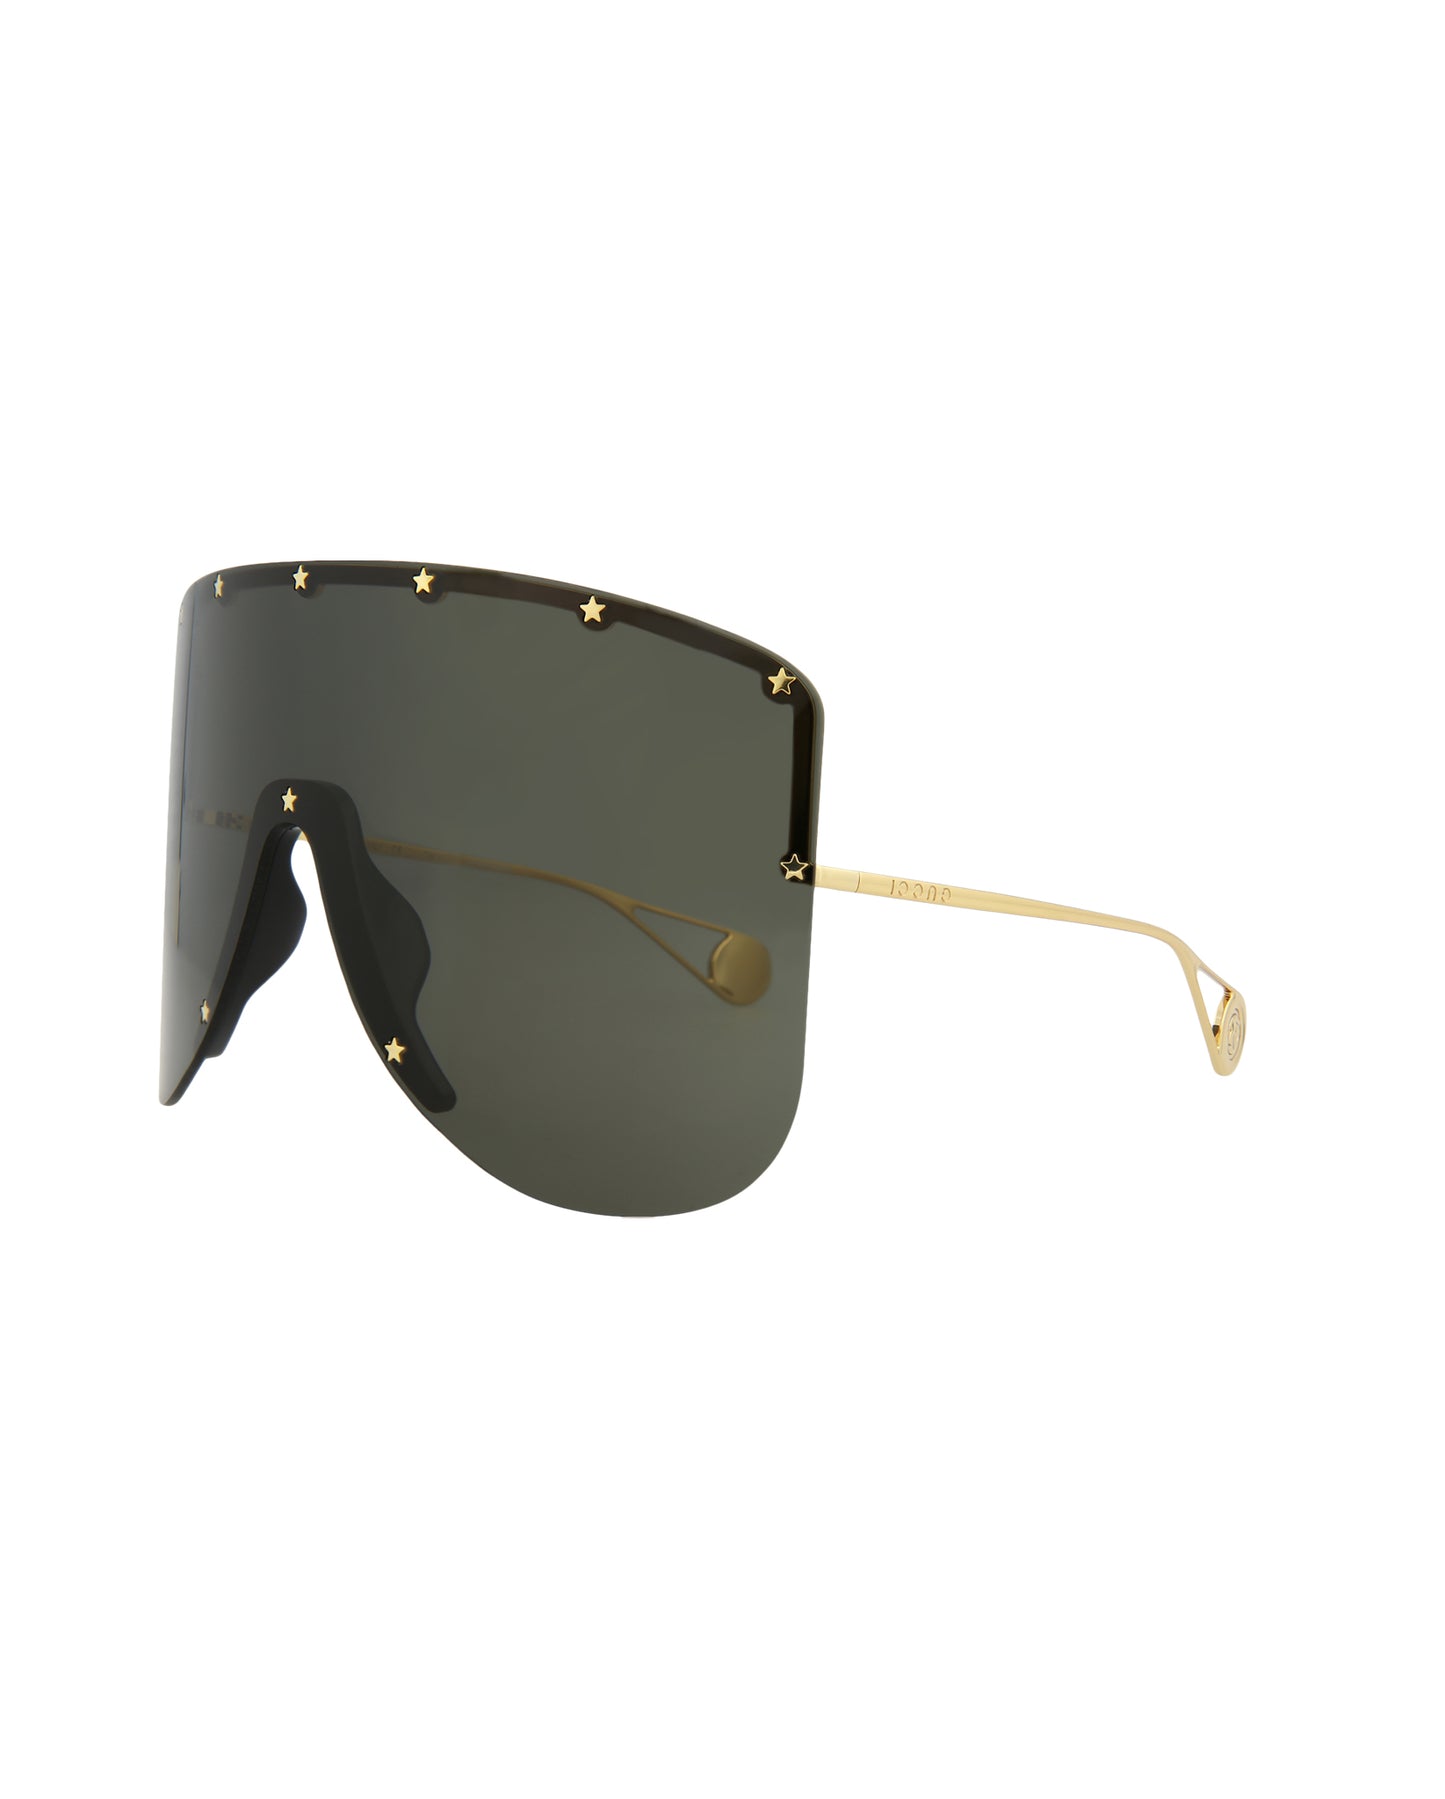 Gucci Special Edition Sunglasses Gold Gold Grey